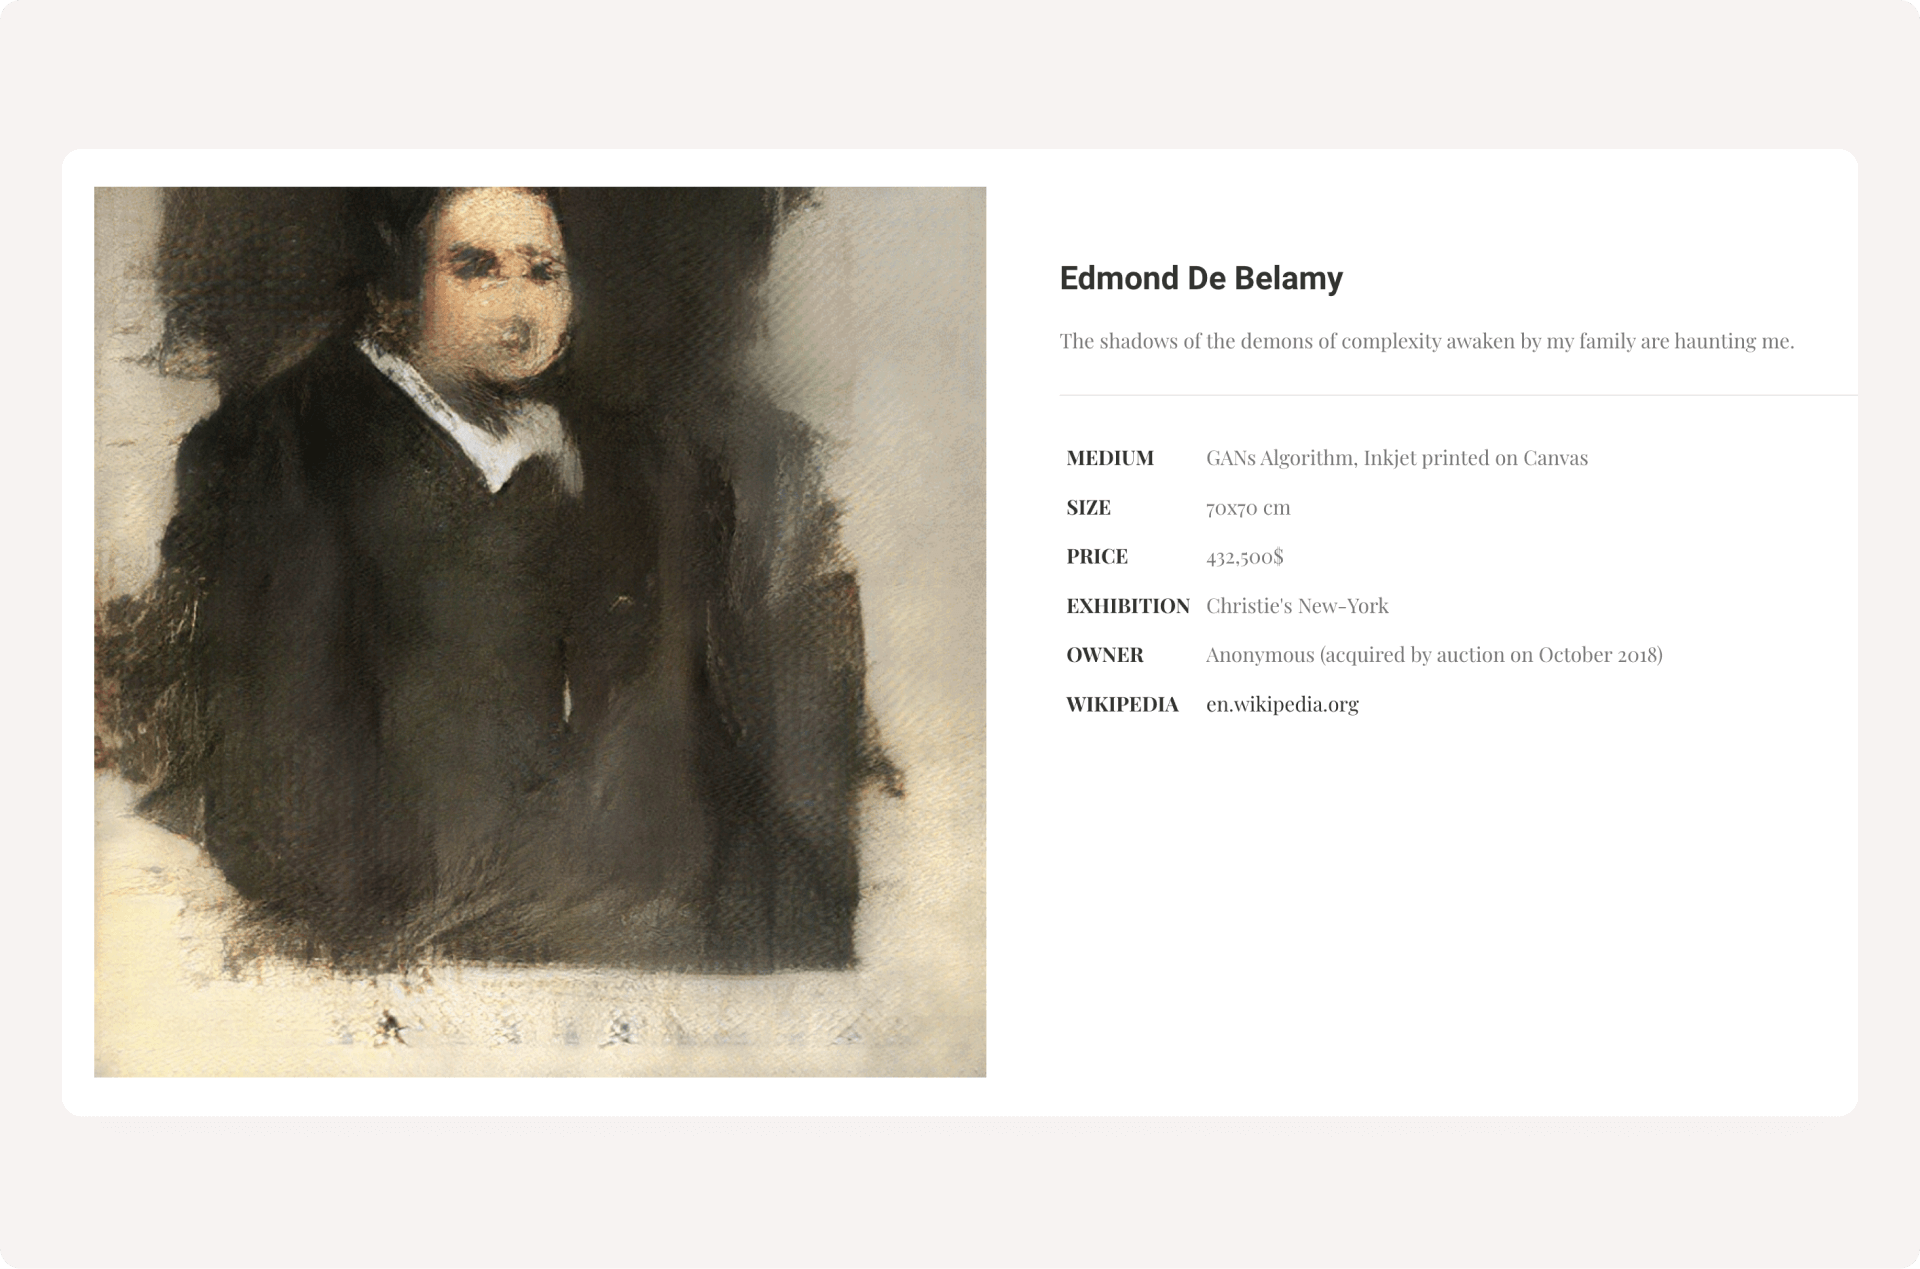 AI-made art looking like a man with blurry face